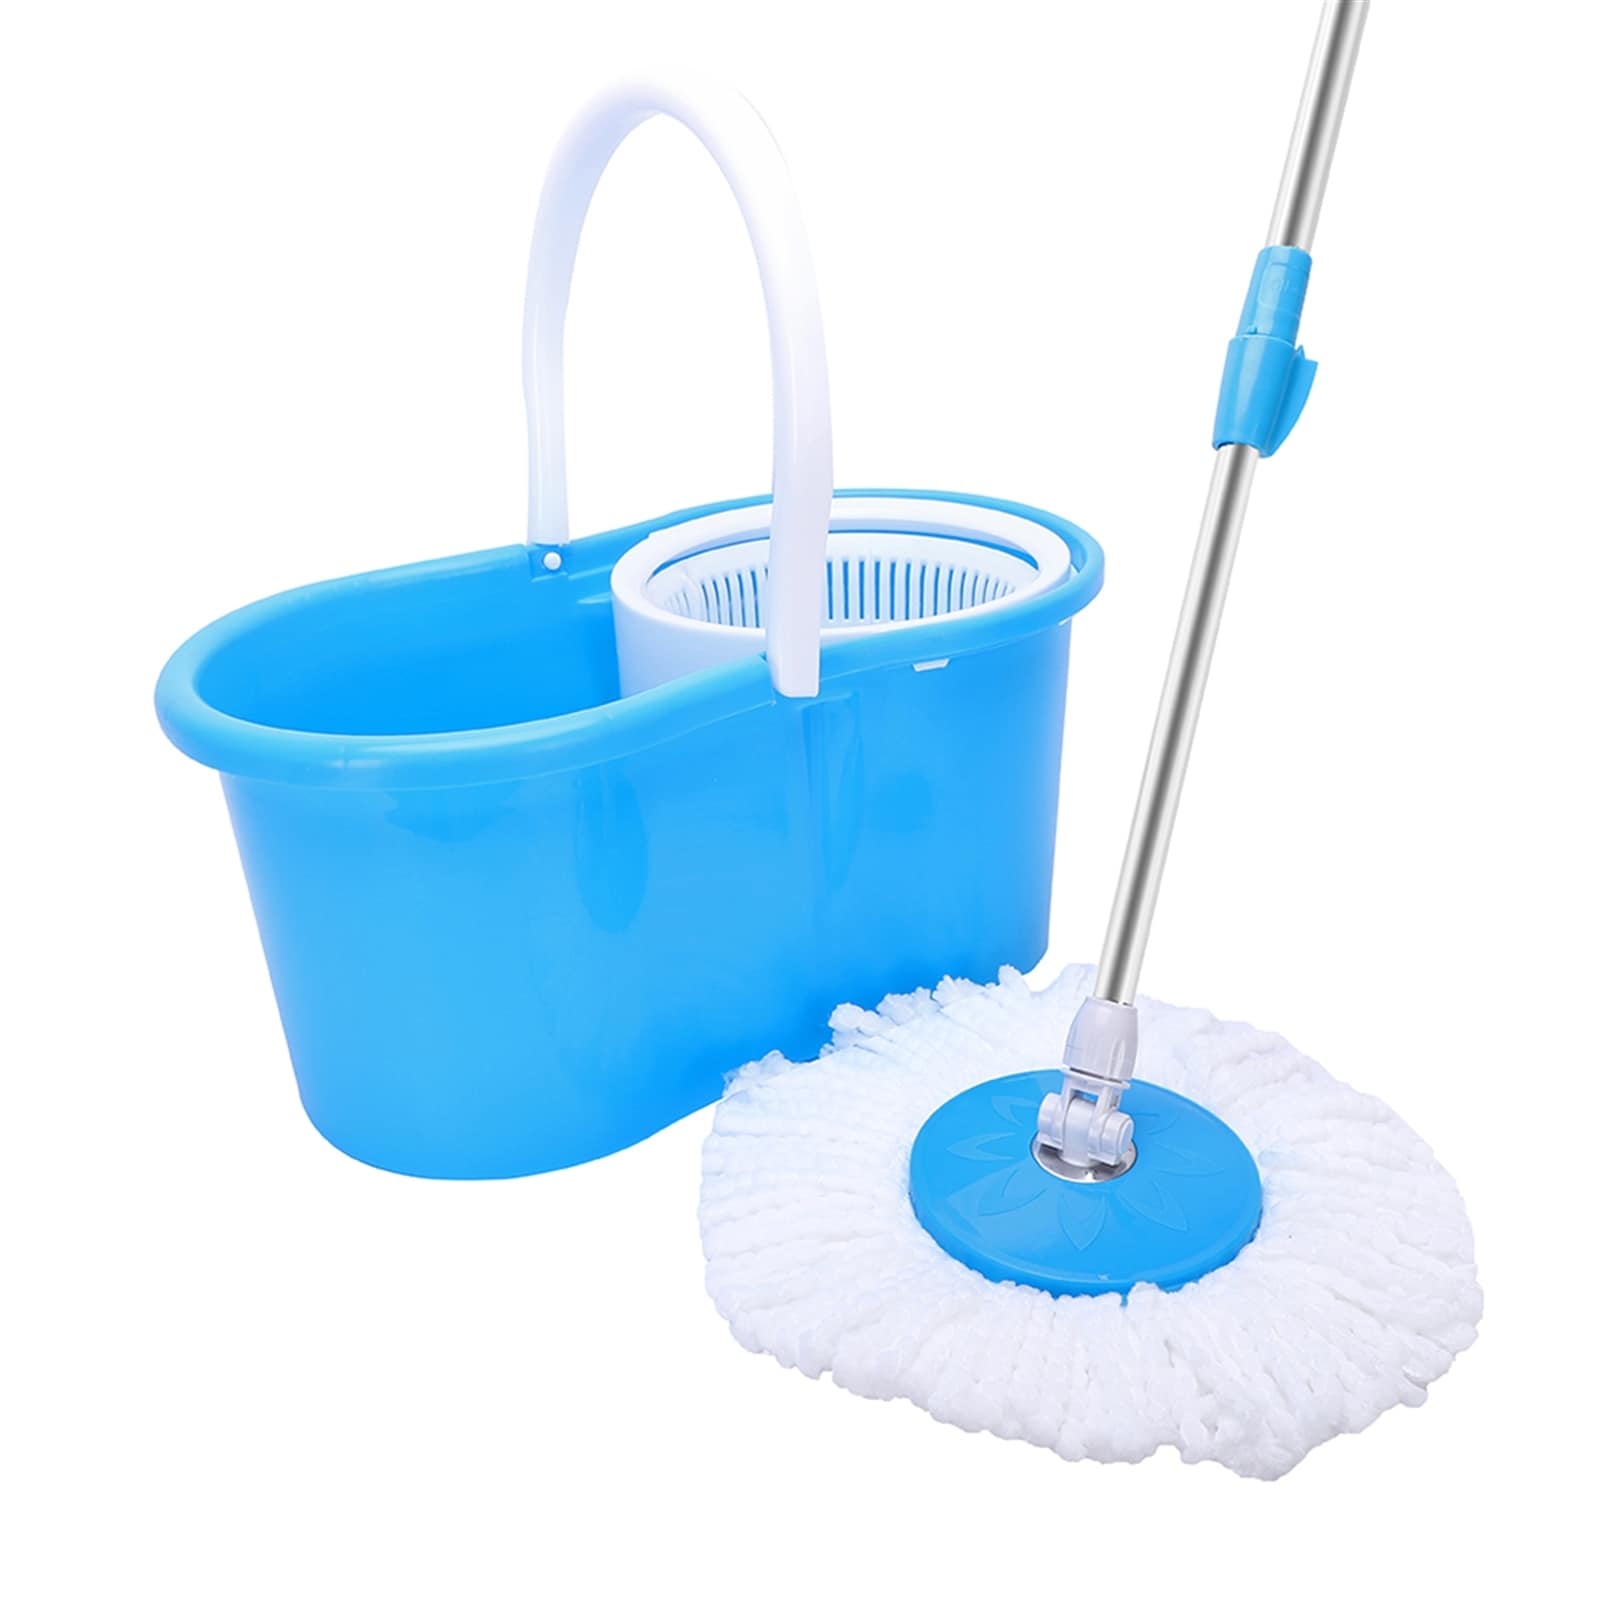 https://ak1.ostkcdn.com/images/products/is/images/direct/15a8499fdc374a7ea5983a1fc982b5b0fa6aa4d1/360%C2%B0-Spin-Mop-with-Bucket-%26-Dual-Mop-Heads.jpg